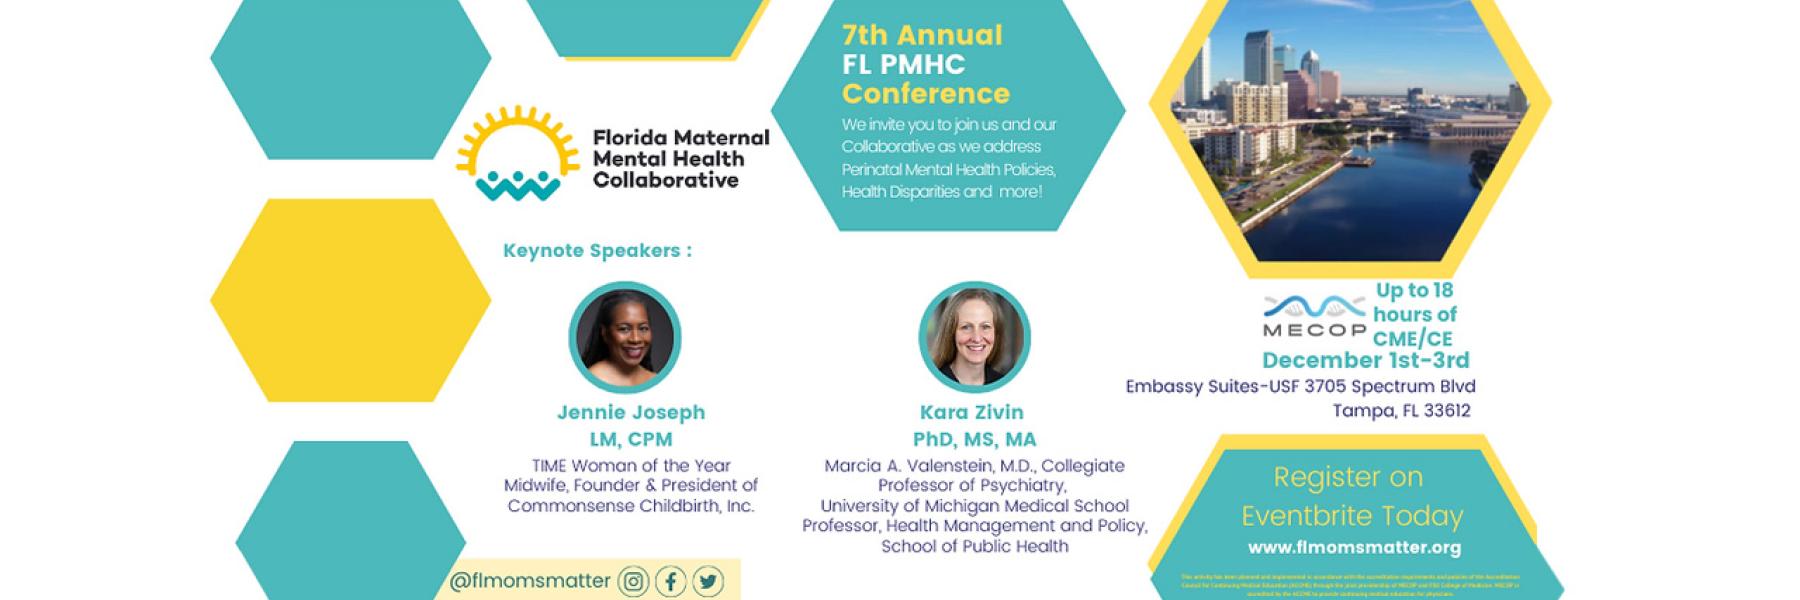 7th Annual FL PMHC Conference banner